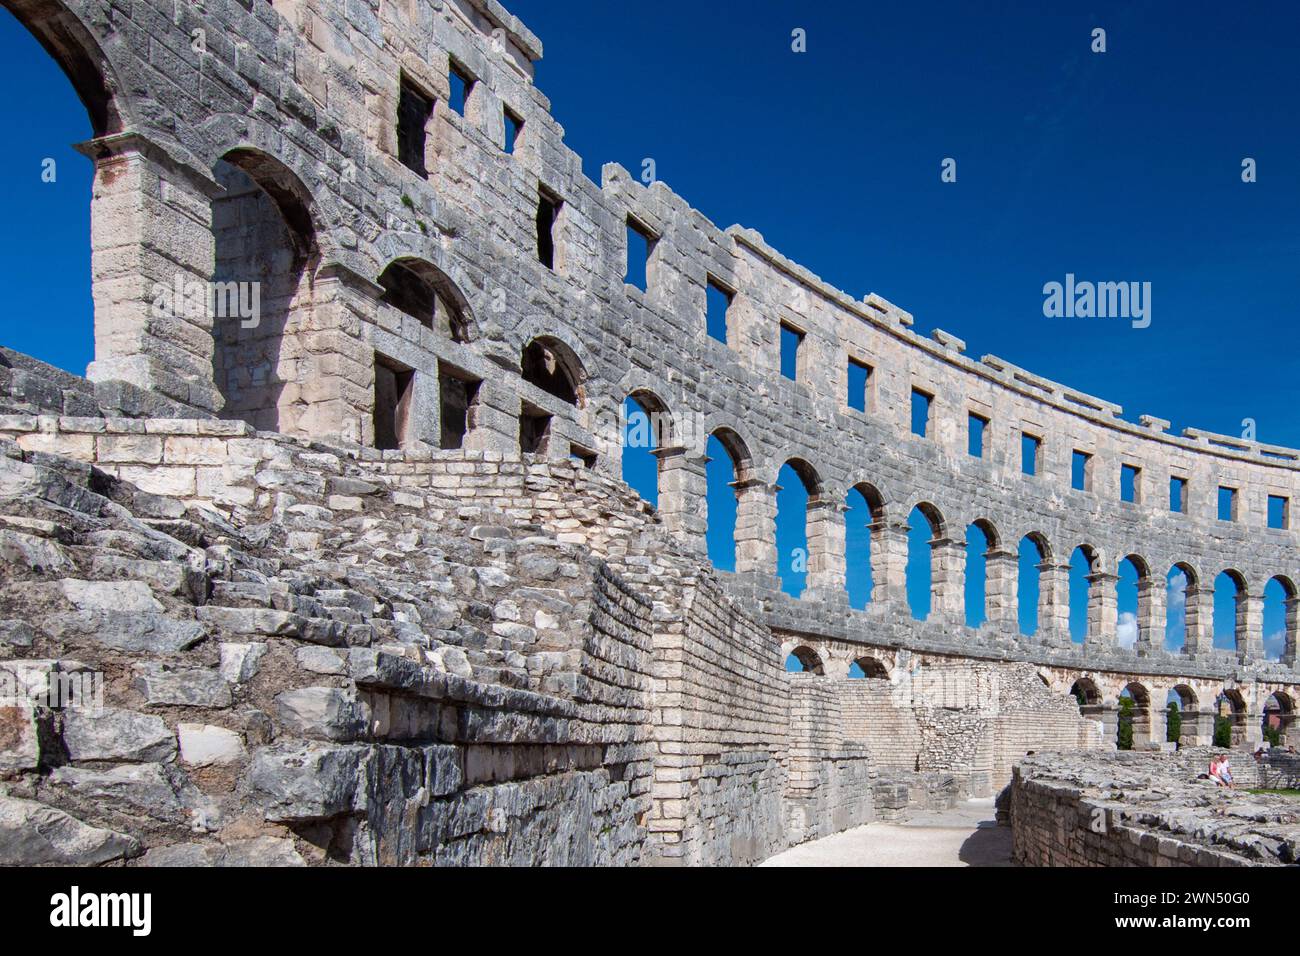 Roman amphitheater in Pula.  Built in the 1st century AD  Arches, architectural details.  Pula, Pola, Istria, Croatia Stock Photo